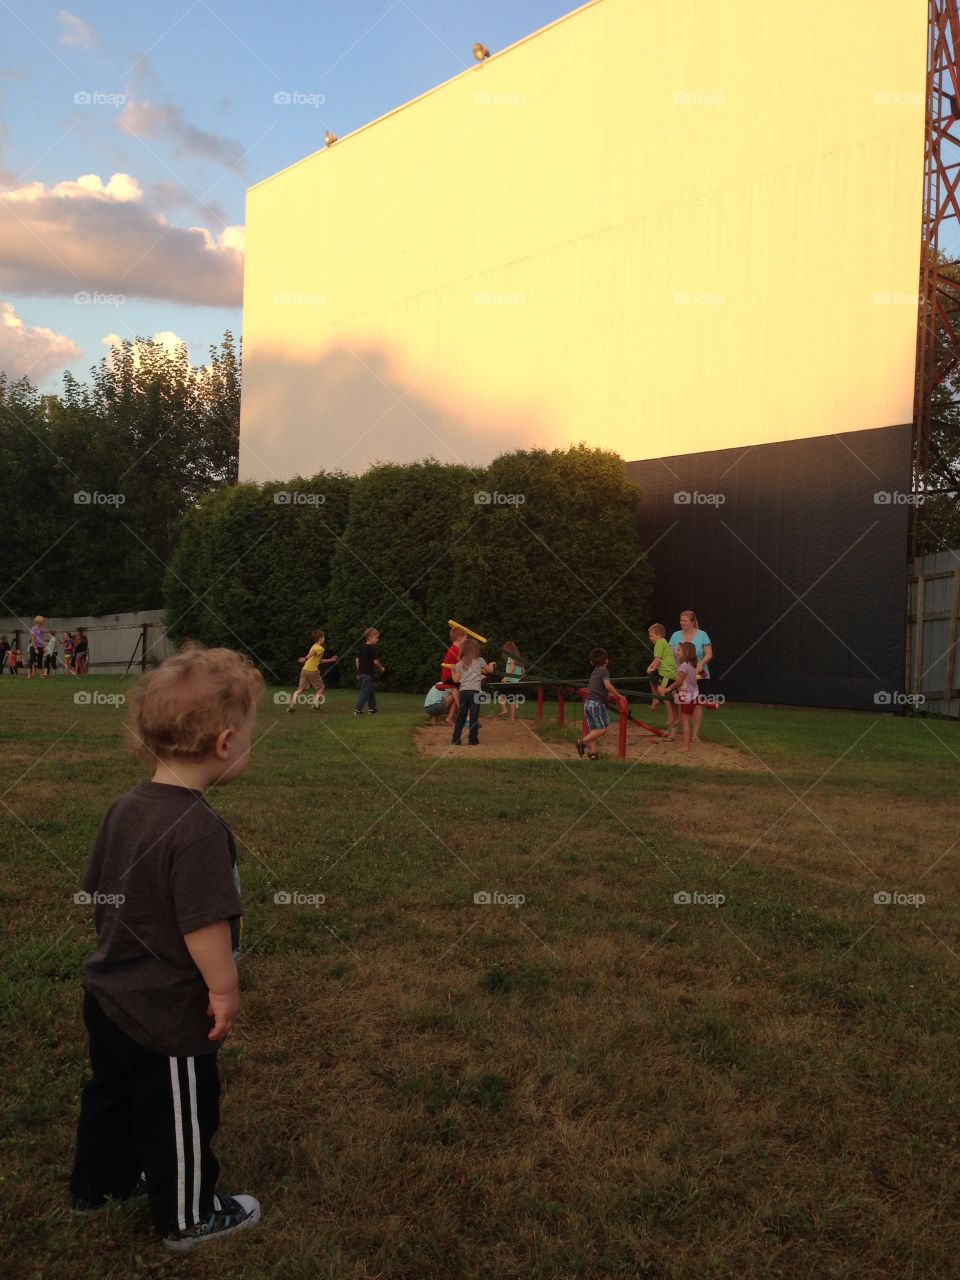 Summer night at the drive-in